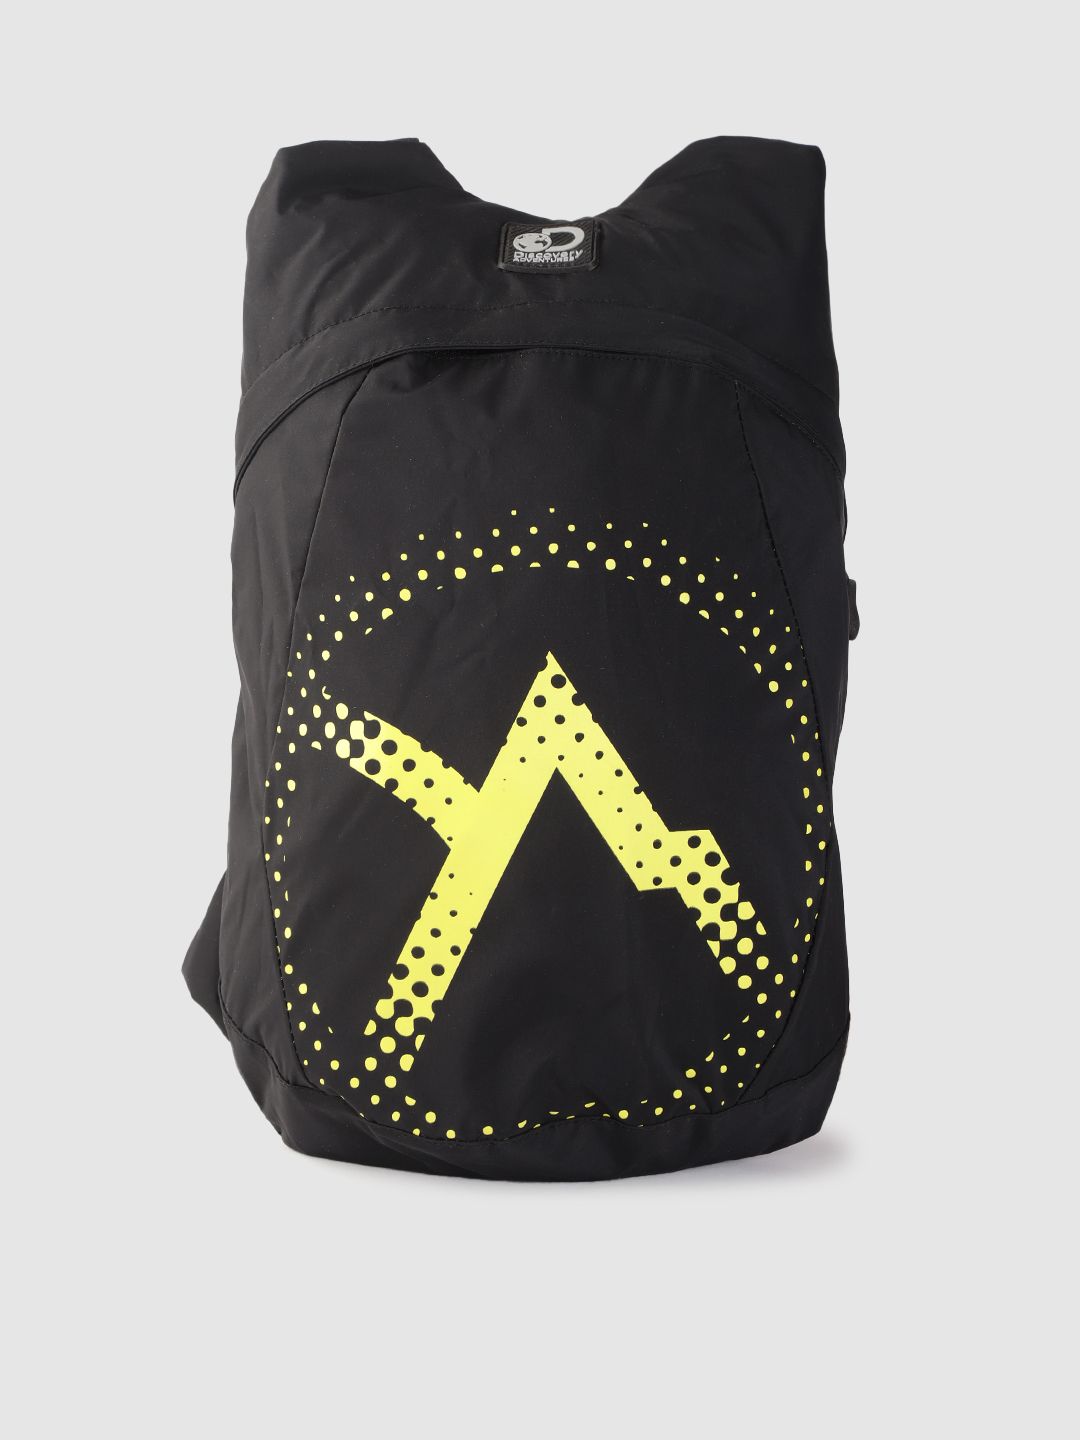 The Roadster Lifestyle Co x Discovery Adventures Unisex Black & Yellow Printed Foldable Backpack Price in India